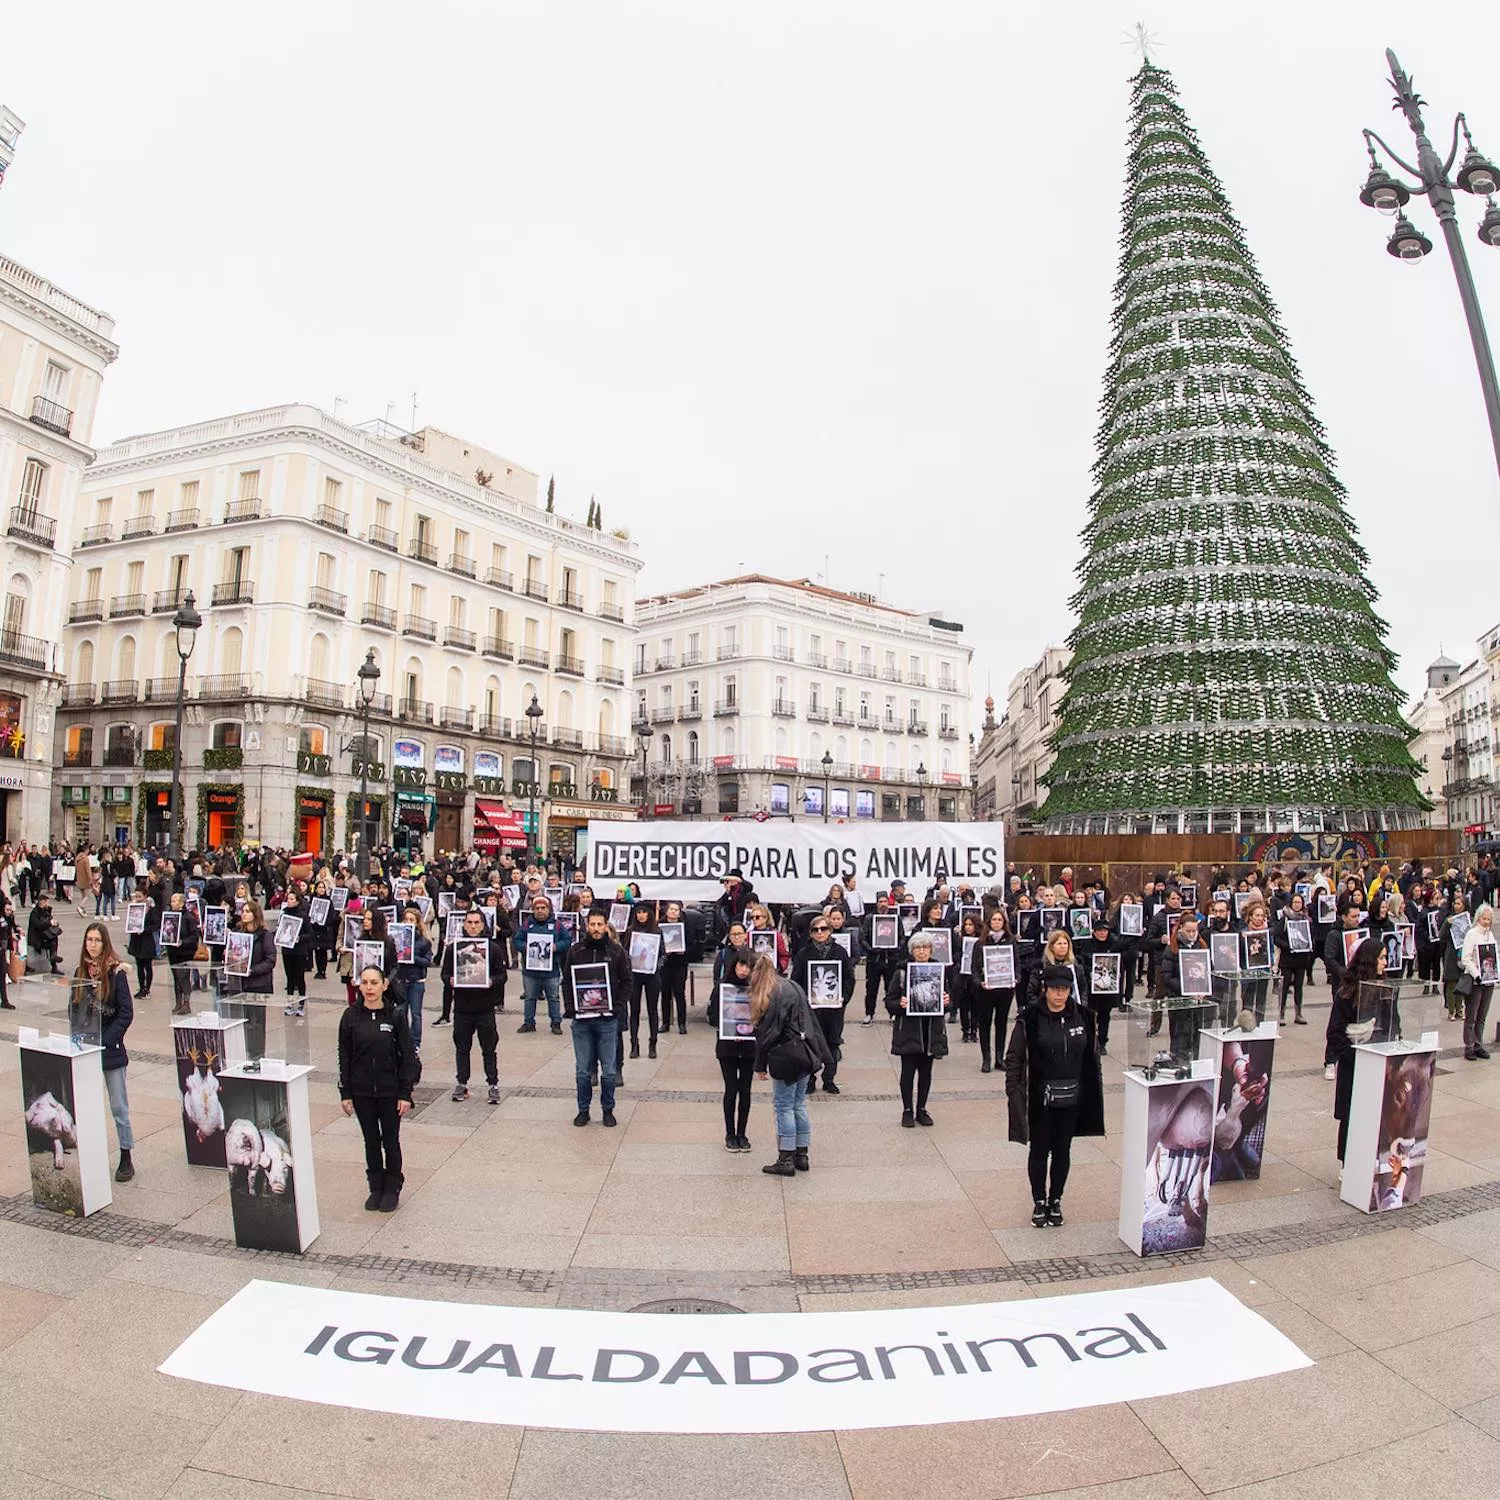 Volunteers with posters during the International Animal Rights Day  protest in Spain